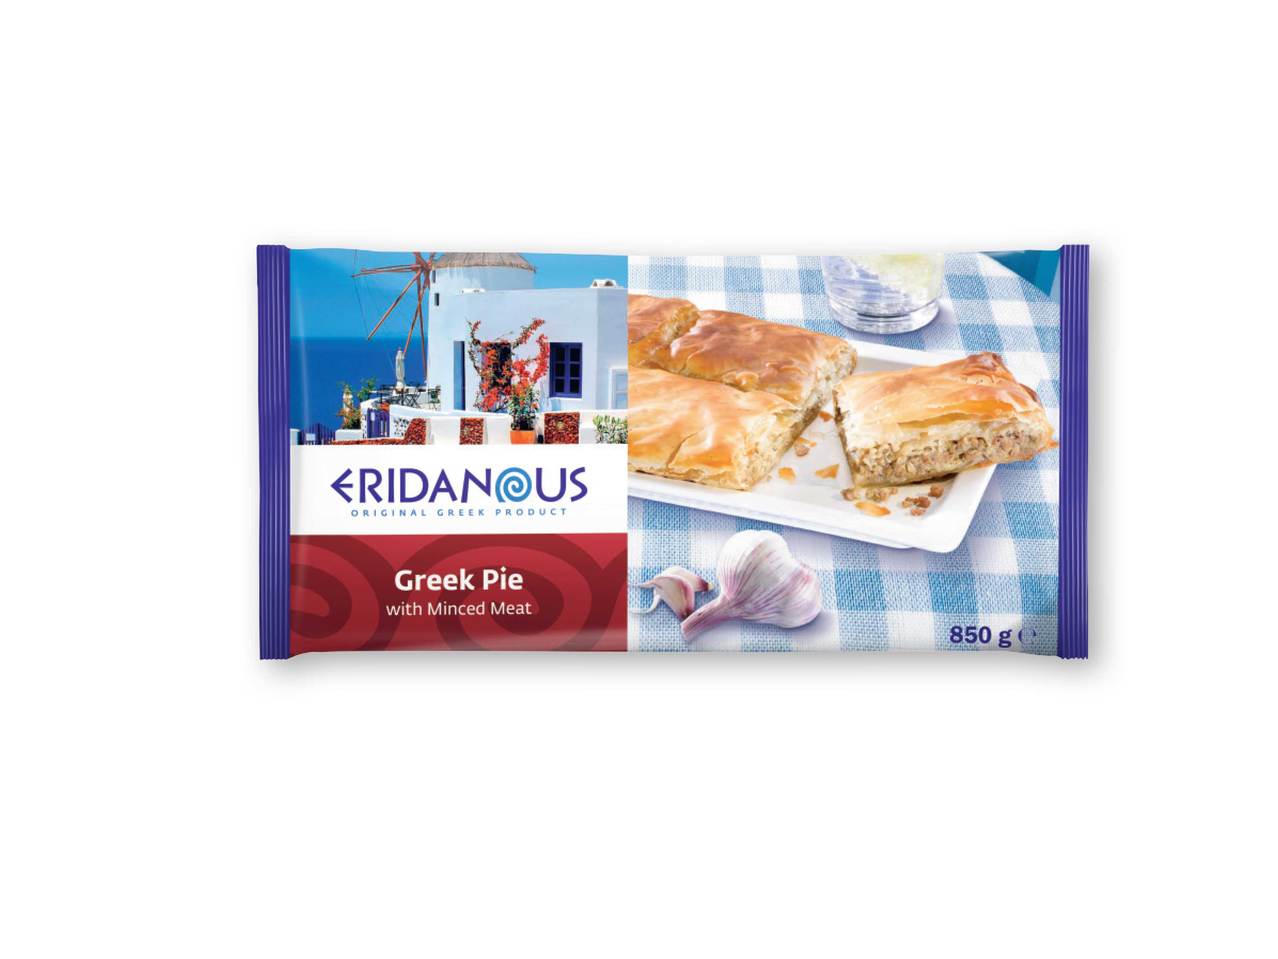 ERIDANOUS Greek Pie with Minced Meat